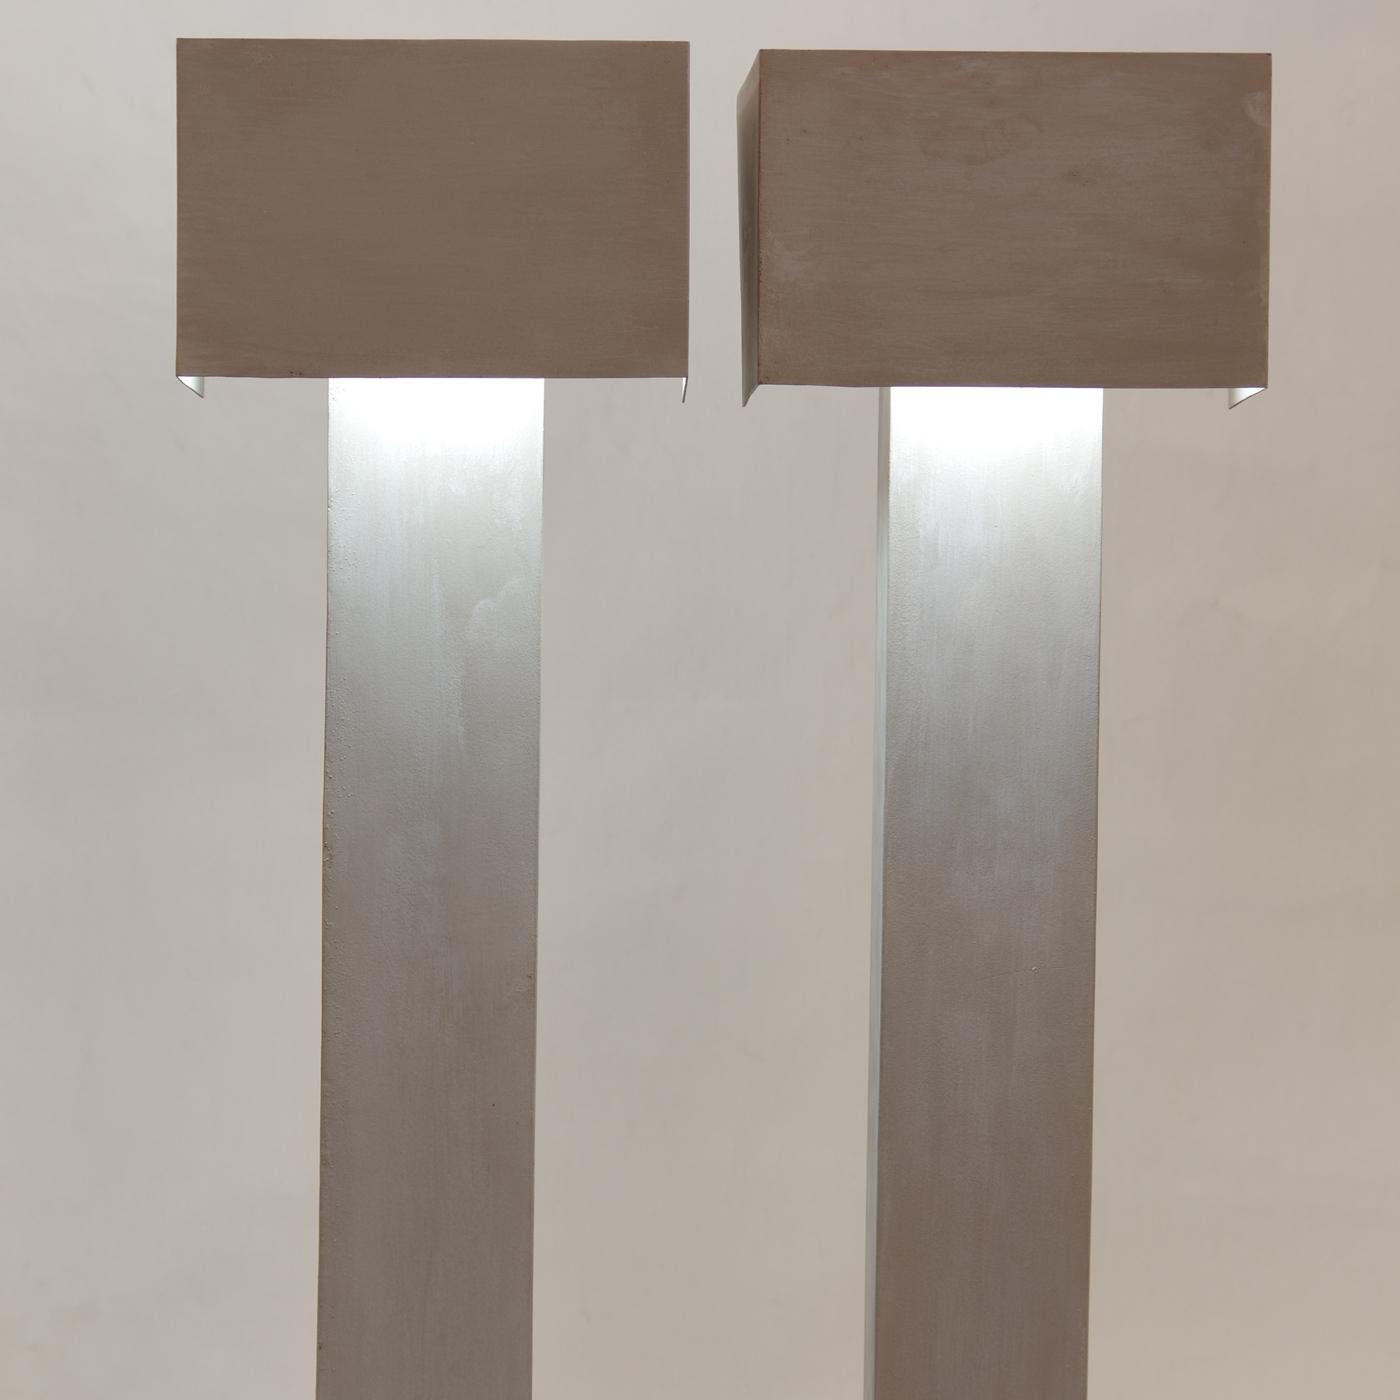 This stunning light sculpture is defined by a T-shaped silhouette, with a polished vertical stem topped by a brown horizontal bar where the light source is nested. The combination of colors and textures is particularly captivating when the lamp is